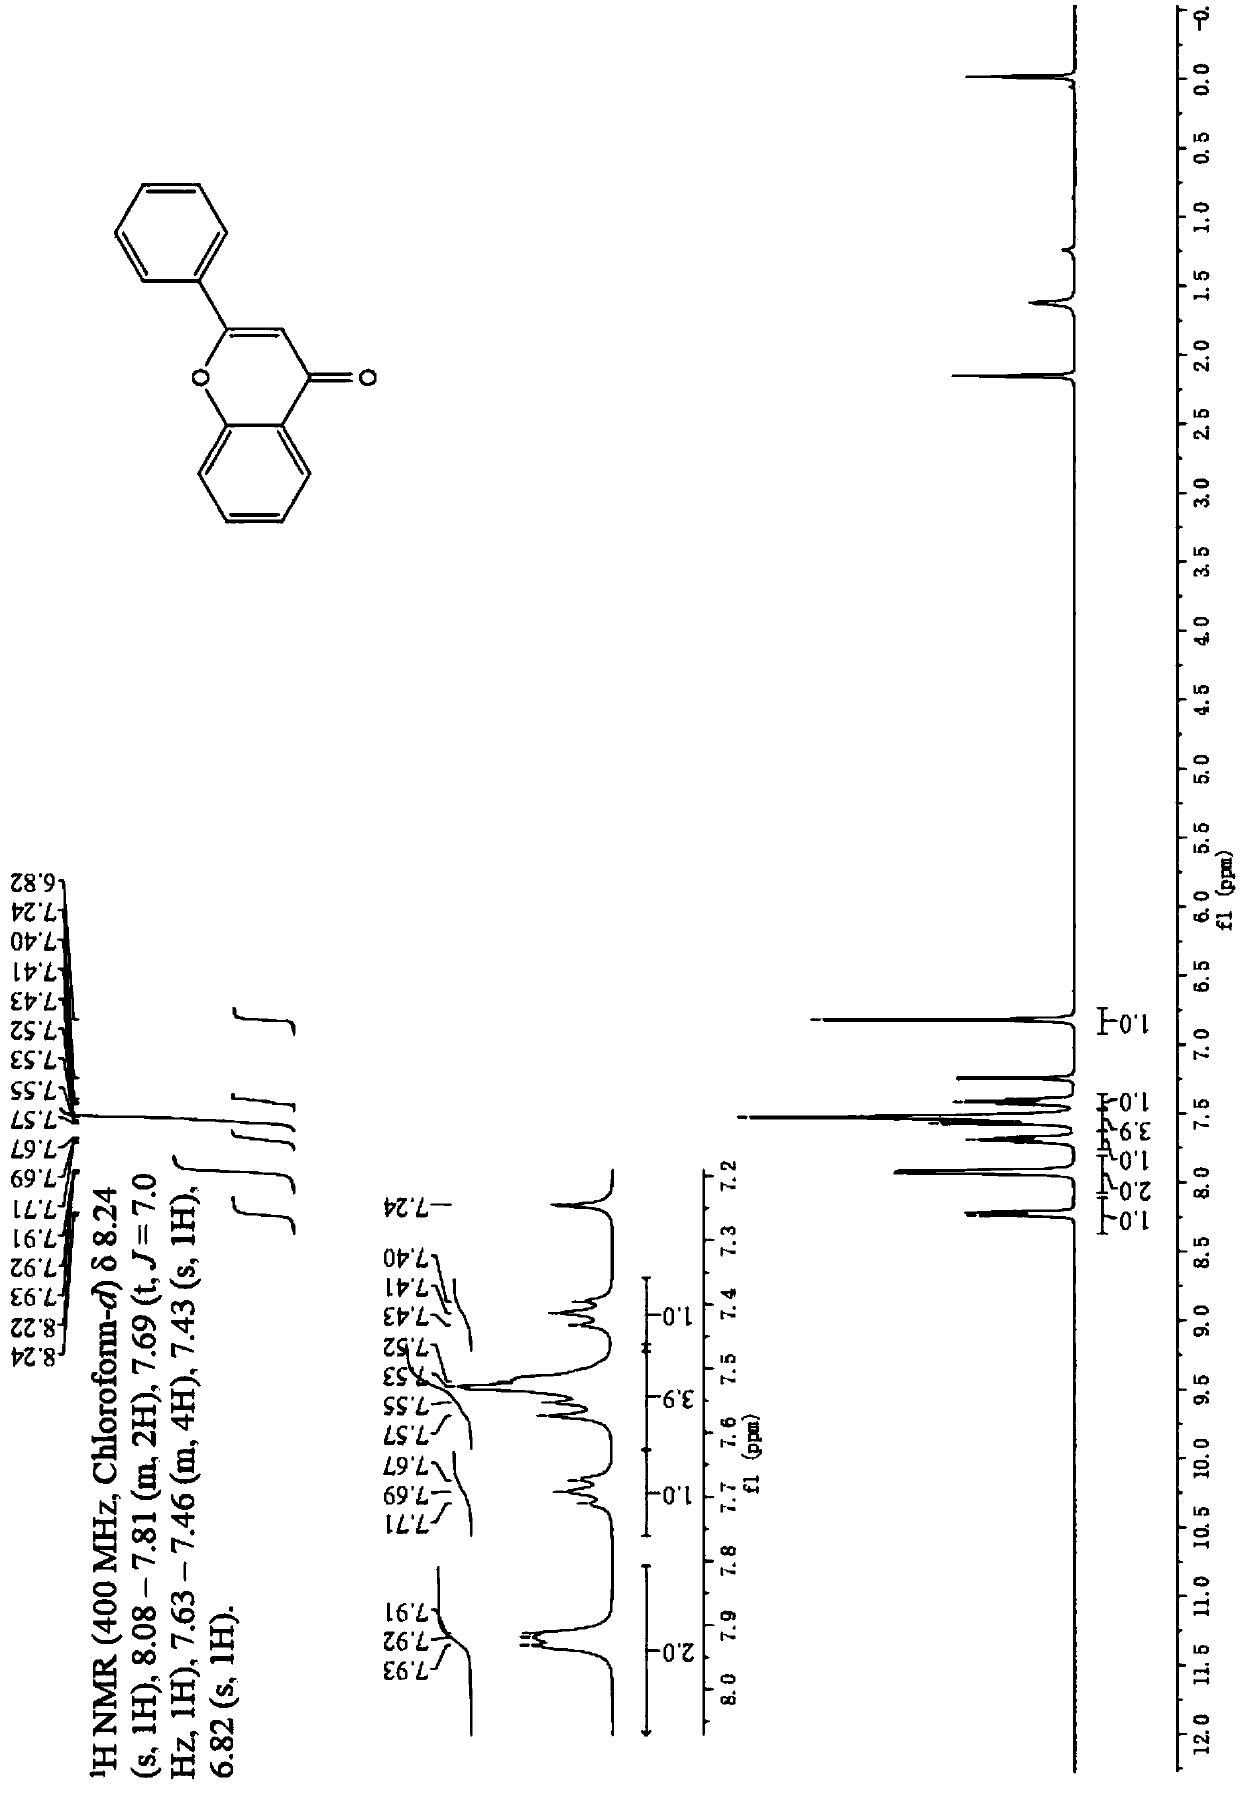 Method for synthesizing 2-aryl benzopyrone flavonoid derivatives